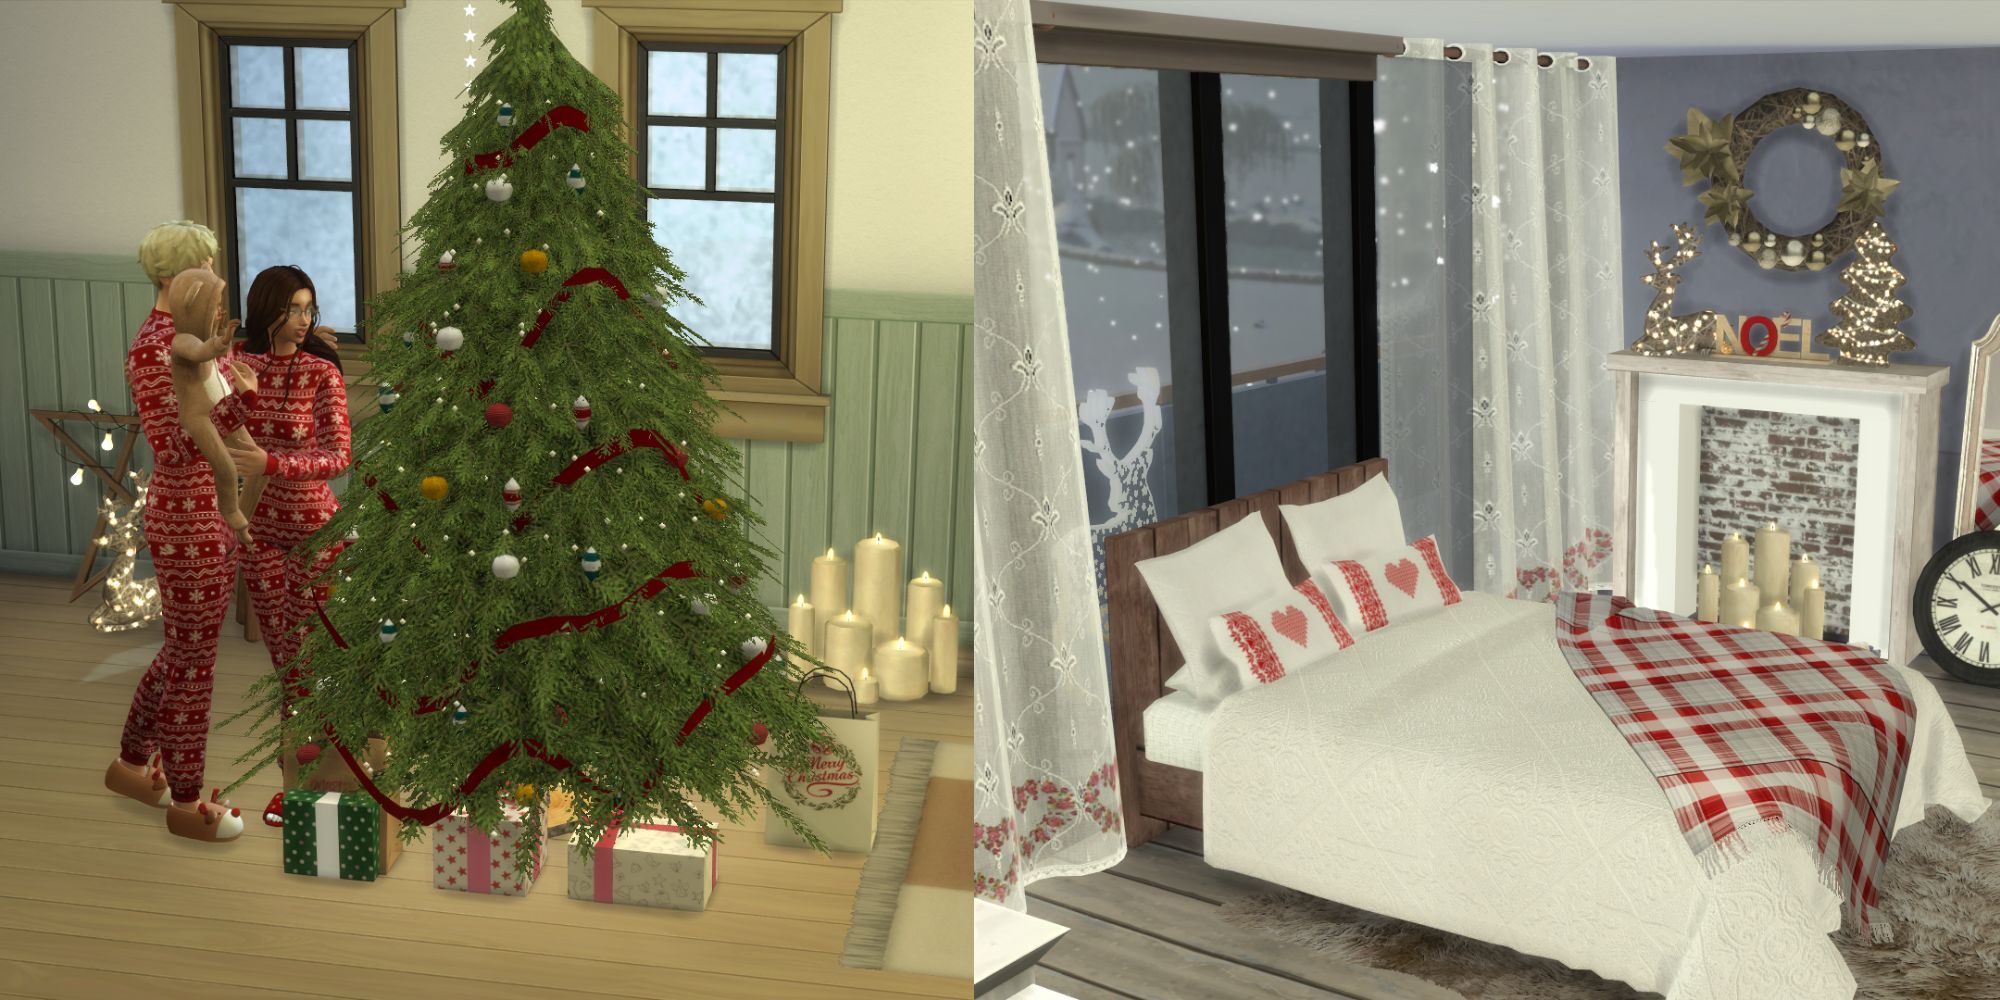 The best Christmas-themed custom content in The Sims 4